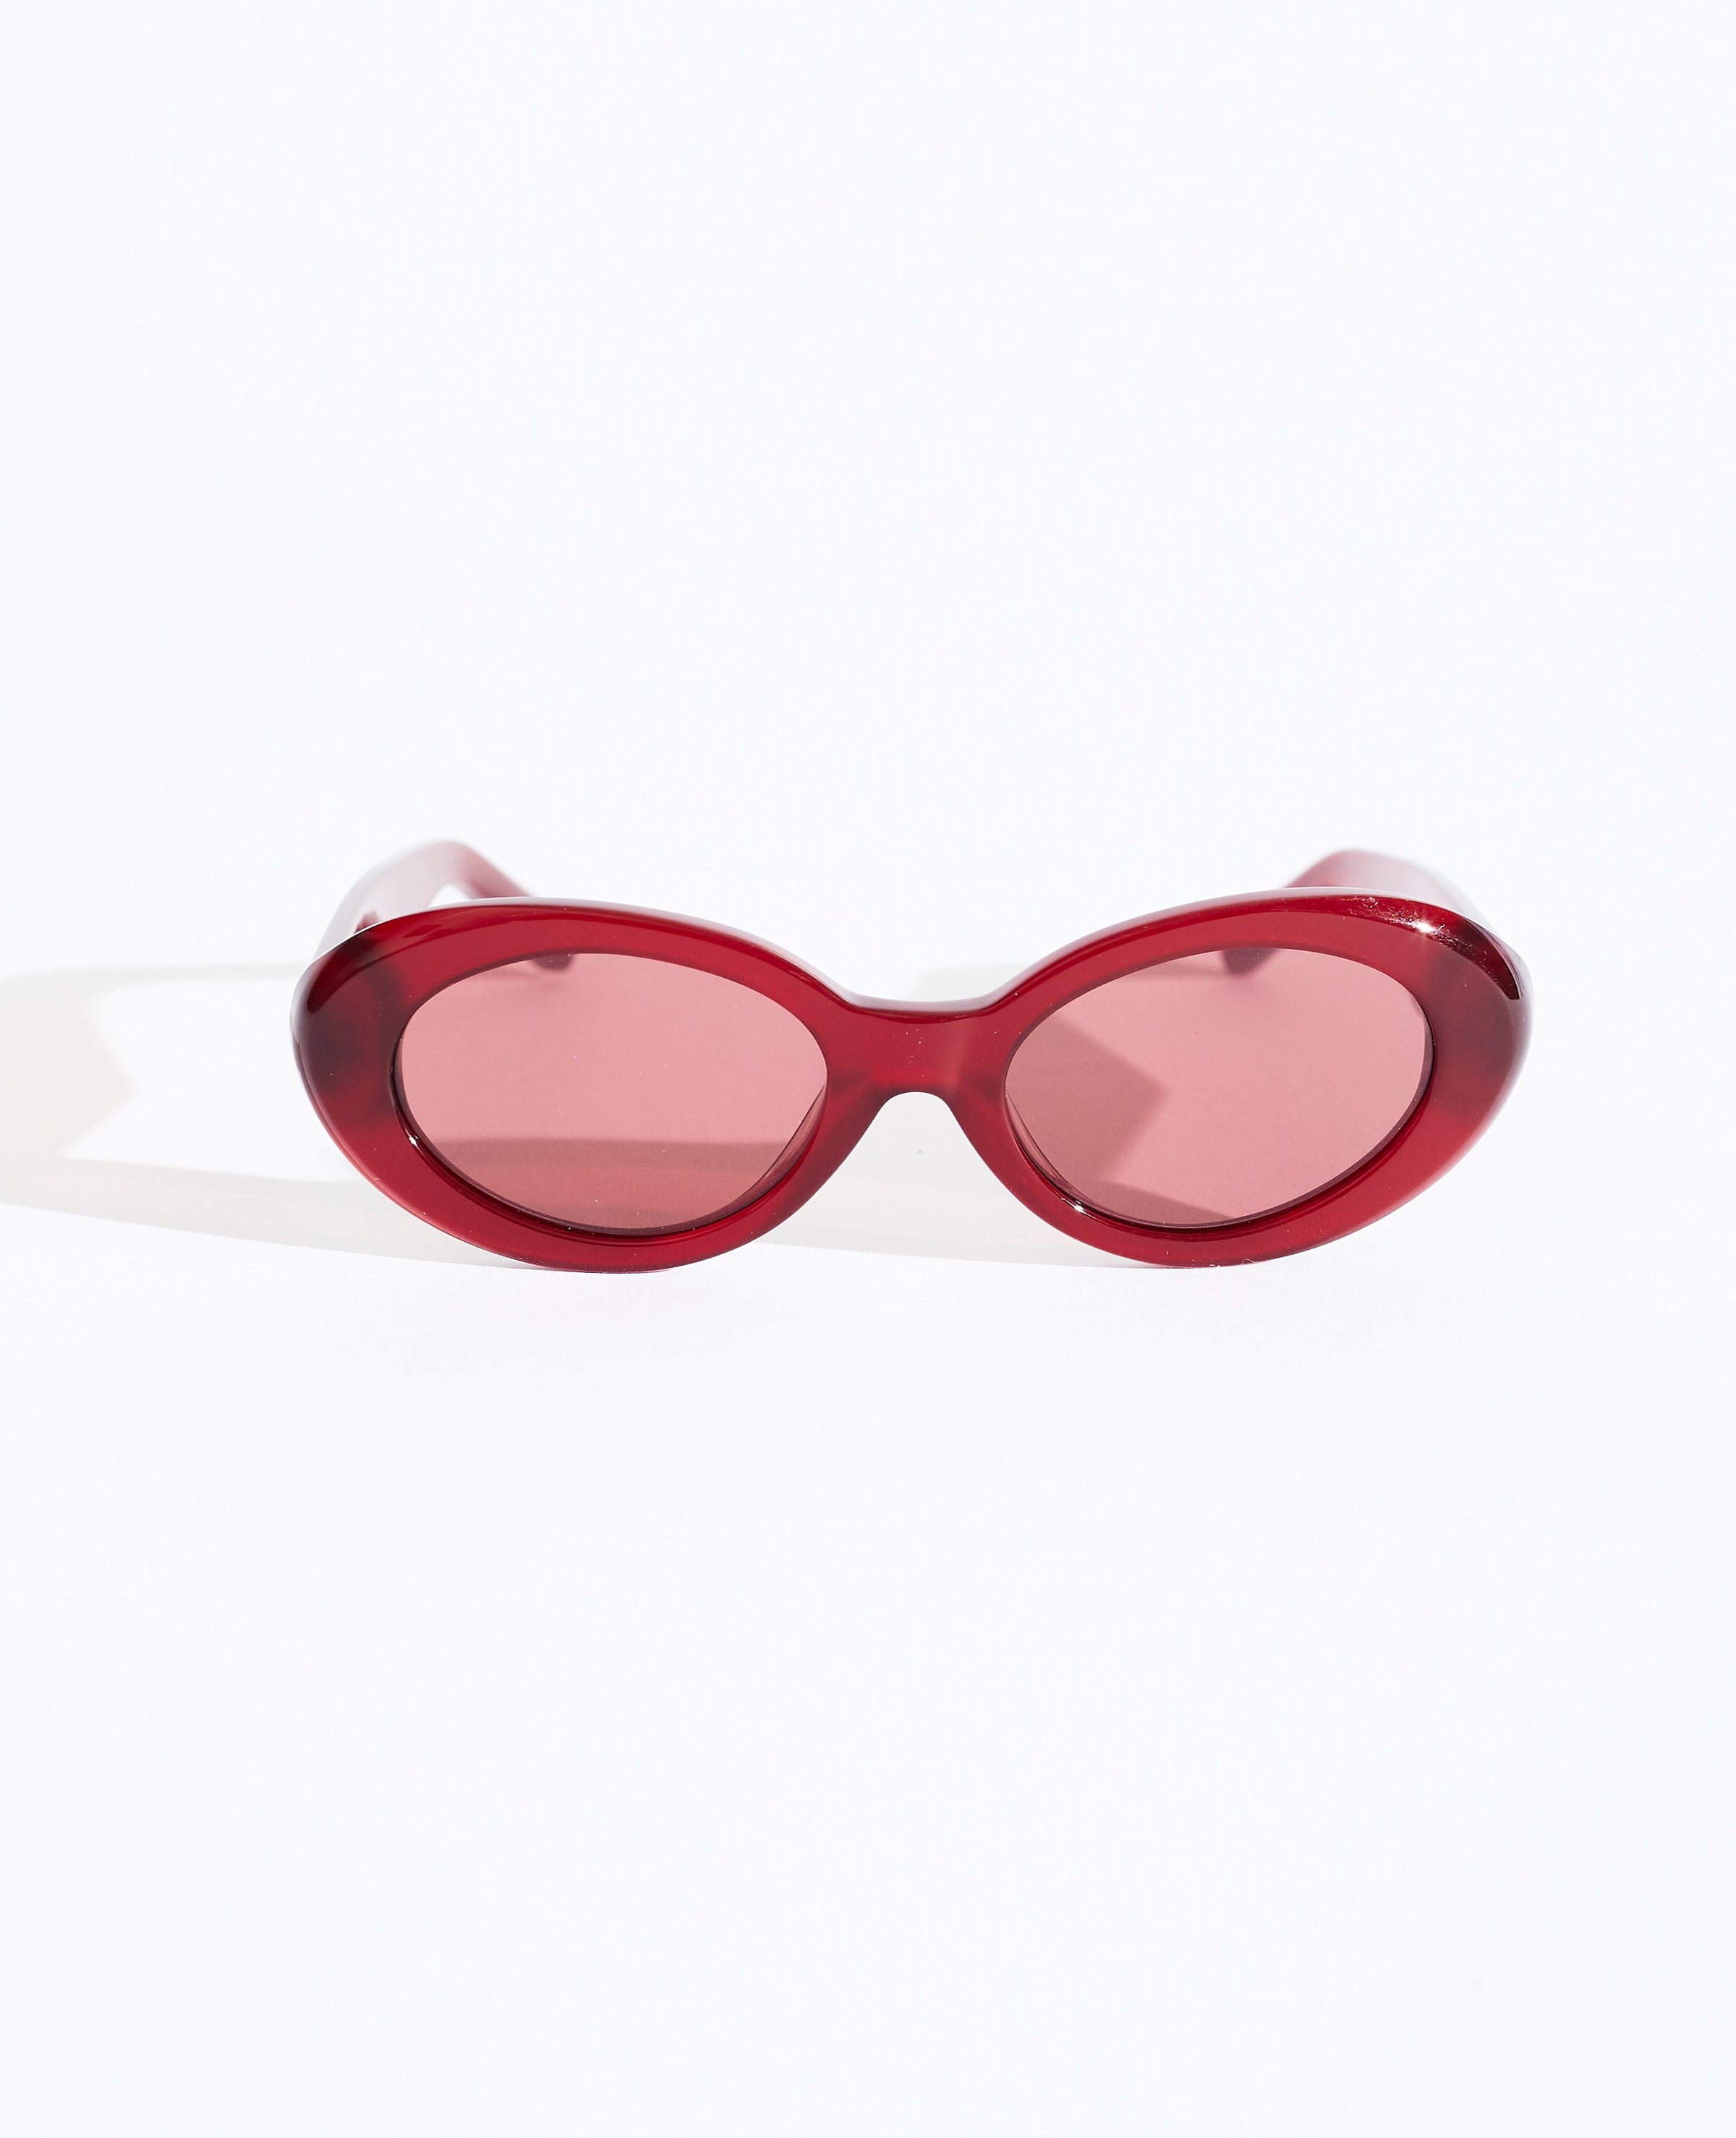 Margot Cedar Red Oval Cat-Eye Sunglasses - The Horse x Local Supply by The Horse®